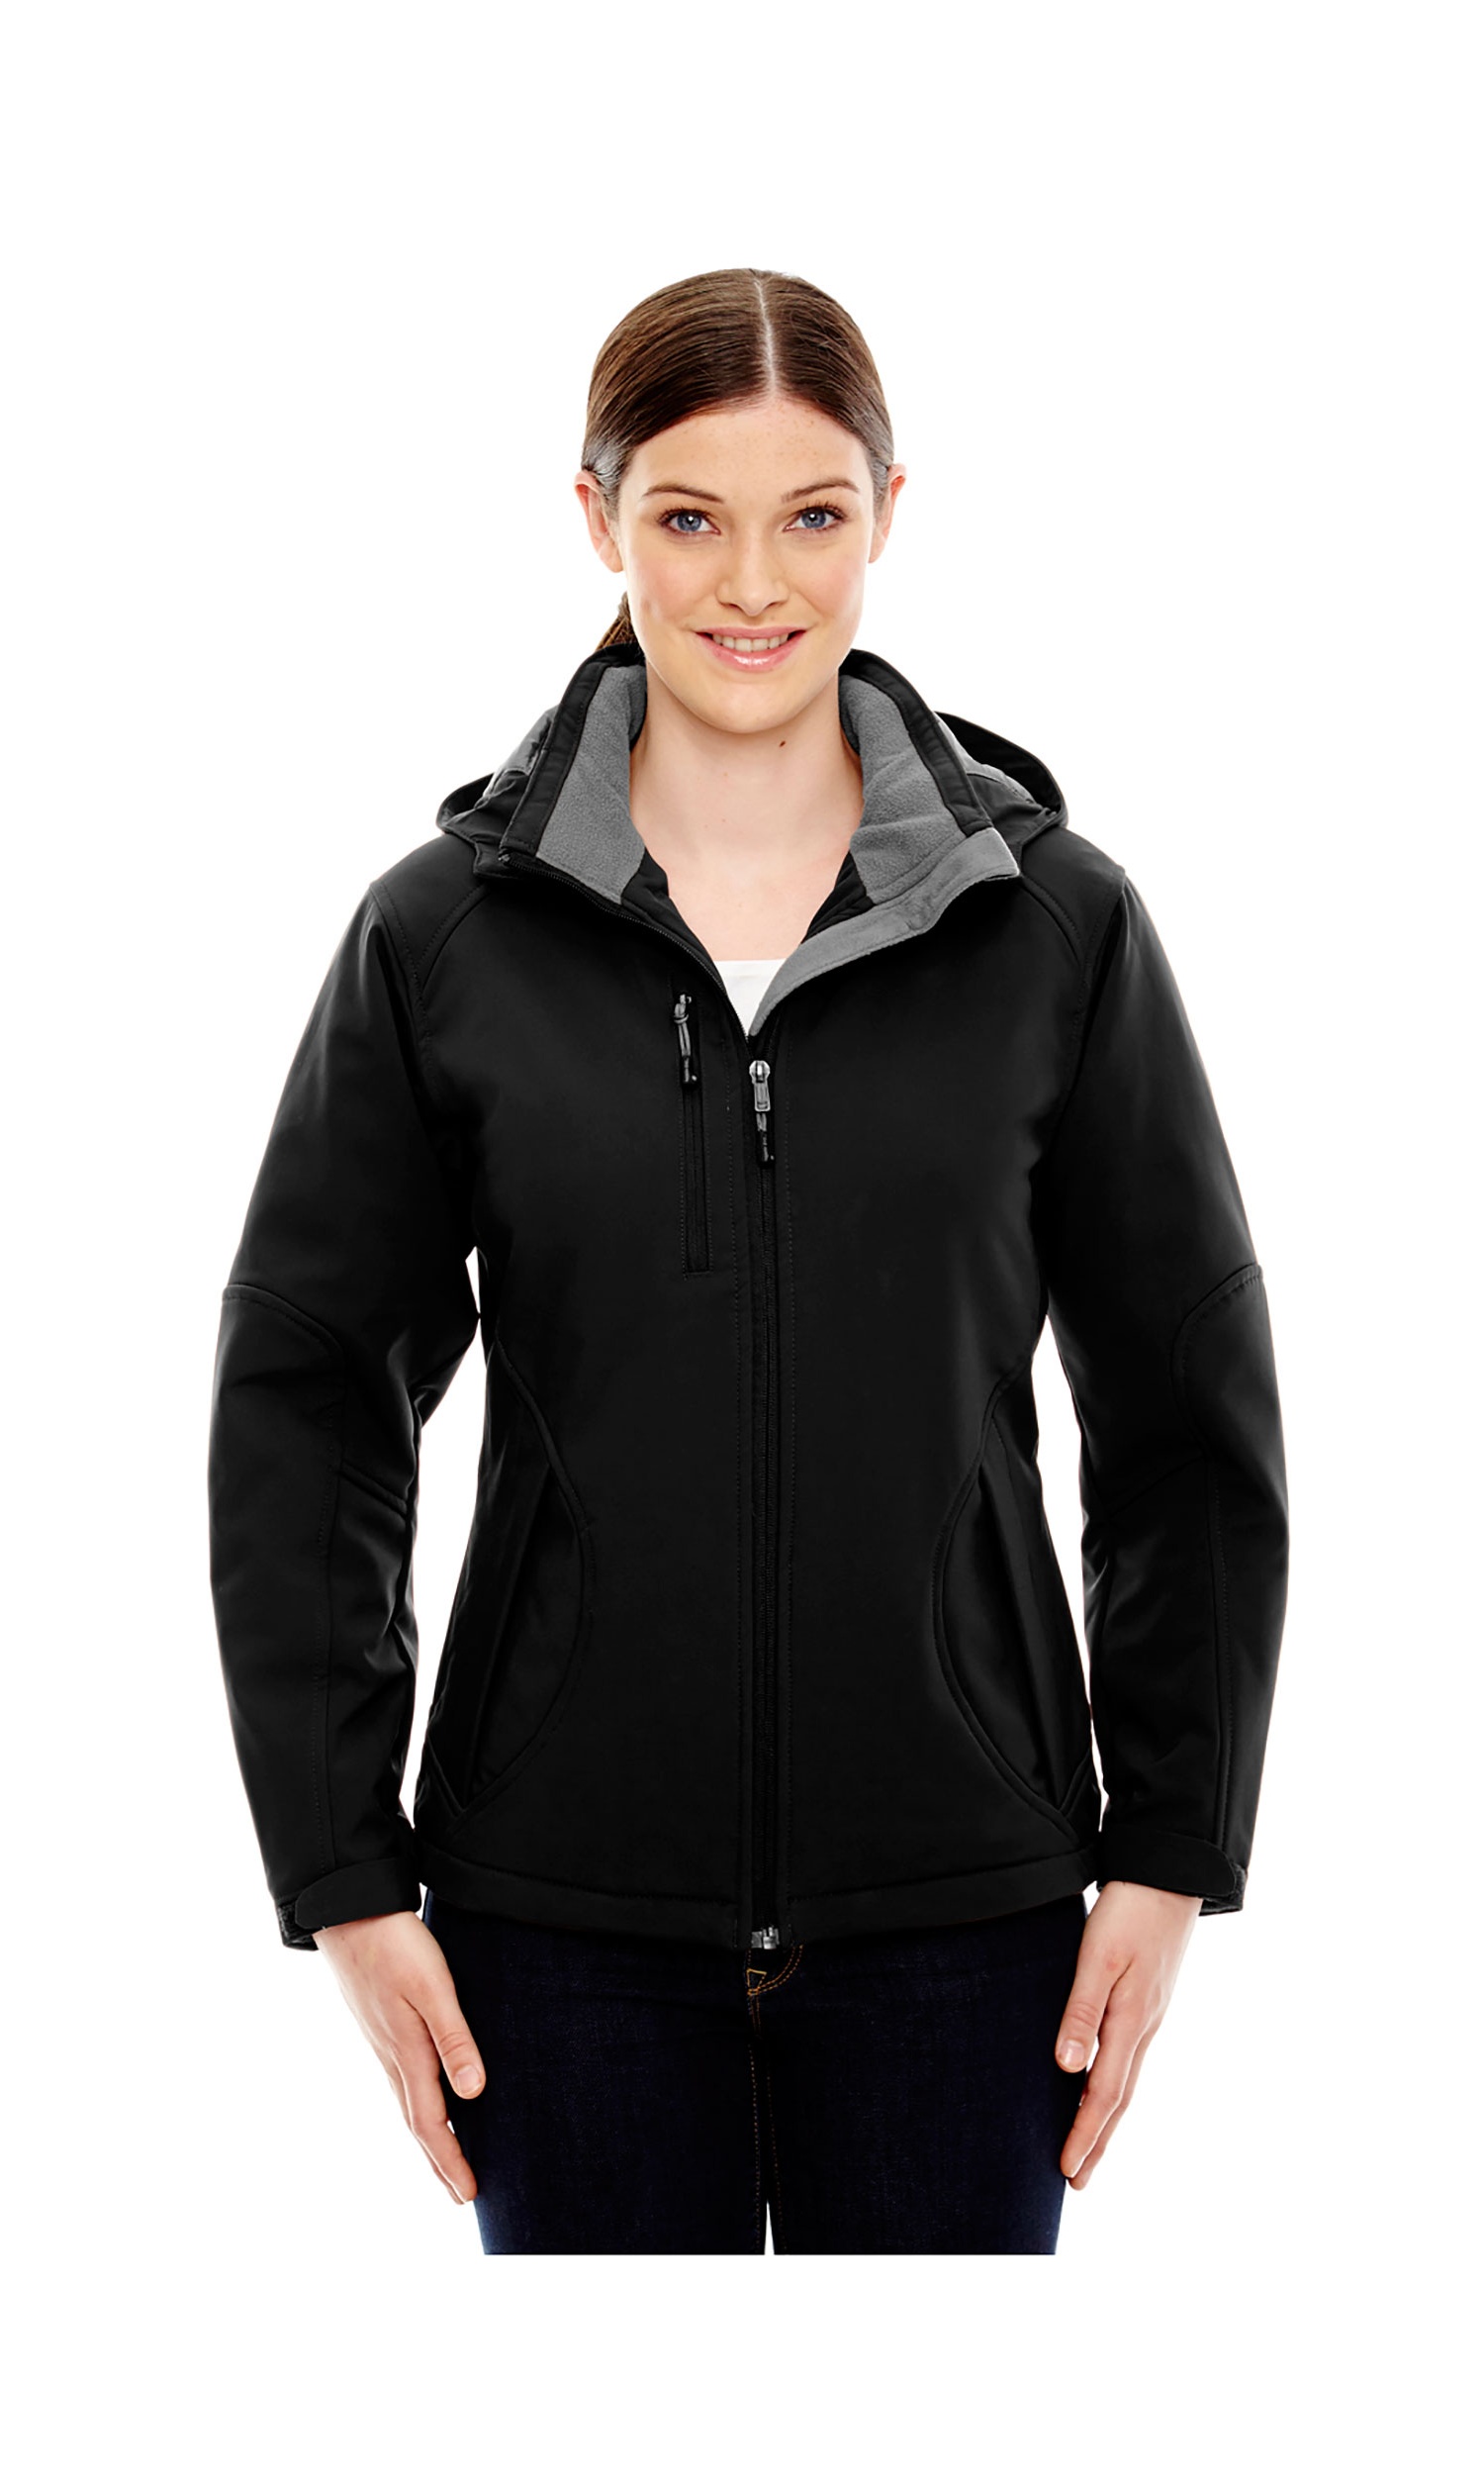 North End Womens Glacier Insulated Soft Shell (78080) - image 1 of 1